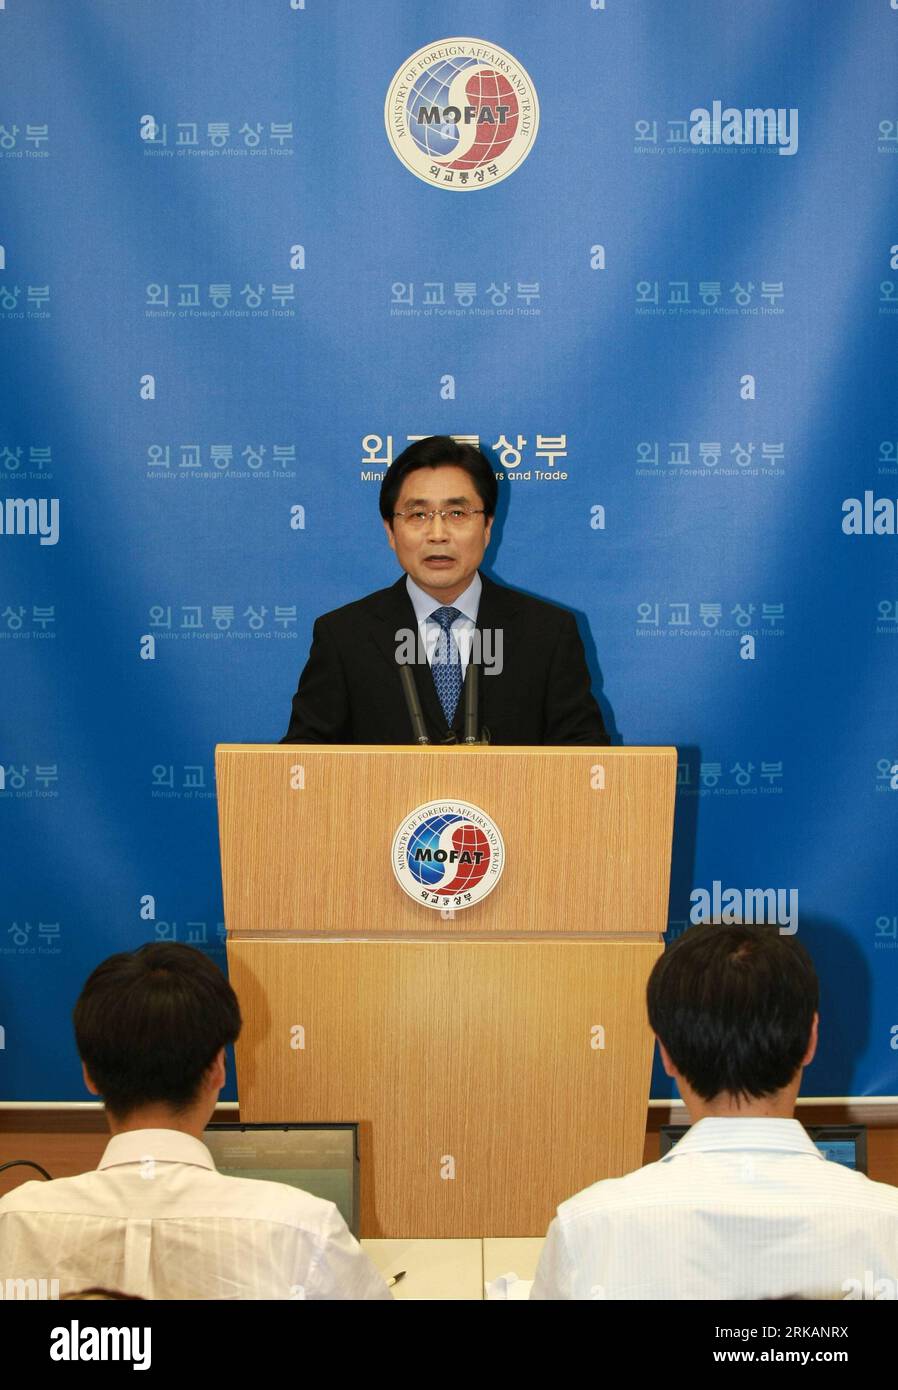 Bildnummer: 54410890  Datum: 08.09.2010  Copyright: imago/Xinhua (100908) -- SEOUL, Sep. 8, 2010 (Xinhua) -- South Korean Foreign Ministry spokesman Kim Young-Sun attend a press conference about independent sanctions on Iran at the Ministry of Foreign Affairs in Seoul, capital of South Korea, Sep. 8, 2010. South Korea unveiled independent sanctions on Iran Wednesday for its contentious nuclear program suspected to be a cover for developing nuclear weapons, joining the U.S.-led campaign to punish the country. (Xinhua/Park Jin-hee) (yc) SOUTH KOREA-IRAN-NUCLEAR-SANCTIONS PUBLICATIONxNOTxINxCHN P Stock Photo